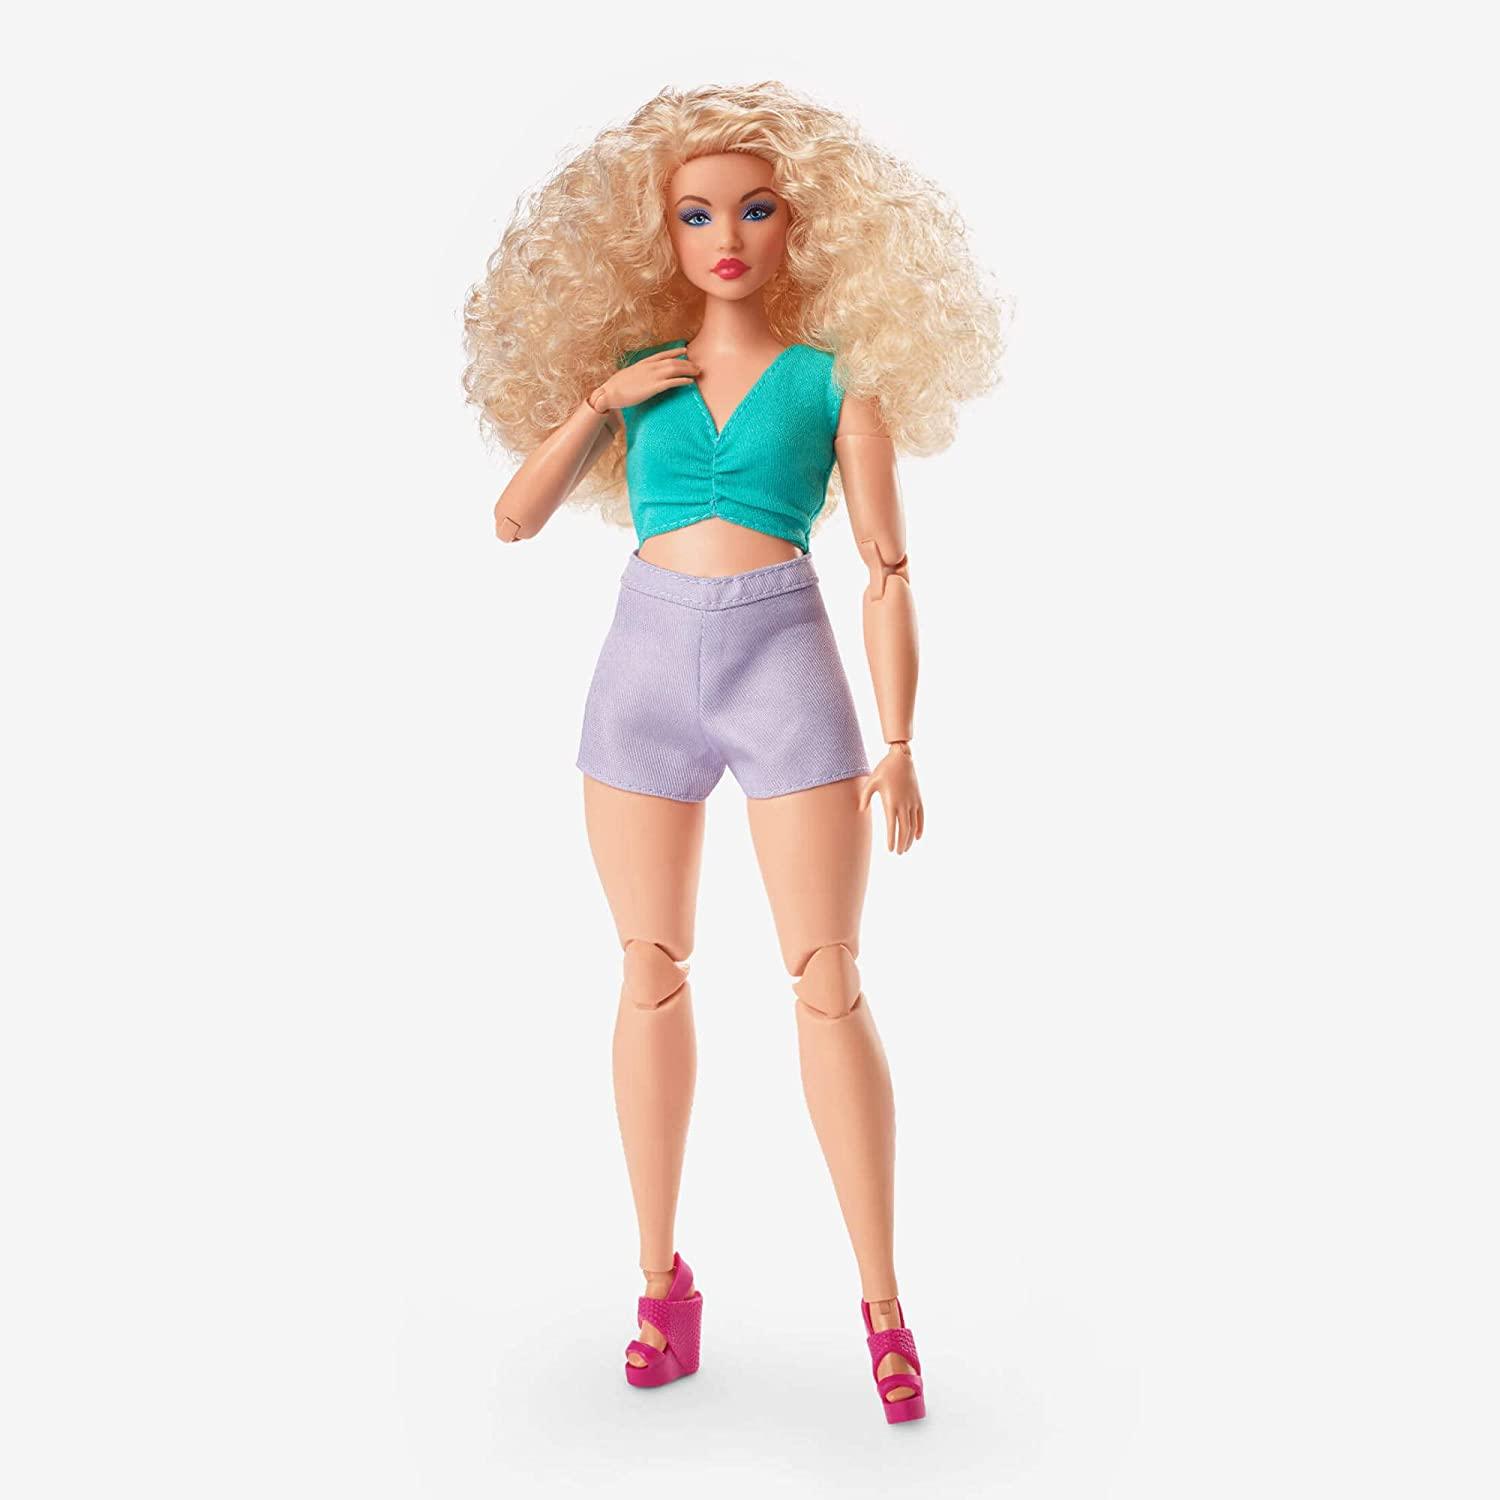 Barbie Looks Doll, Blonde Curly Hair, Color Block Outfit with Waist Cut-Out, Curvy Body Type, Style and Pose, Fashion Collectibles - BumbleToys - 5-7 Years, Barbie, Fashion Dolls & Accessories, Girls, Pre-Order